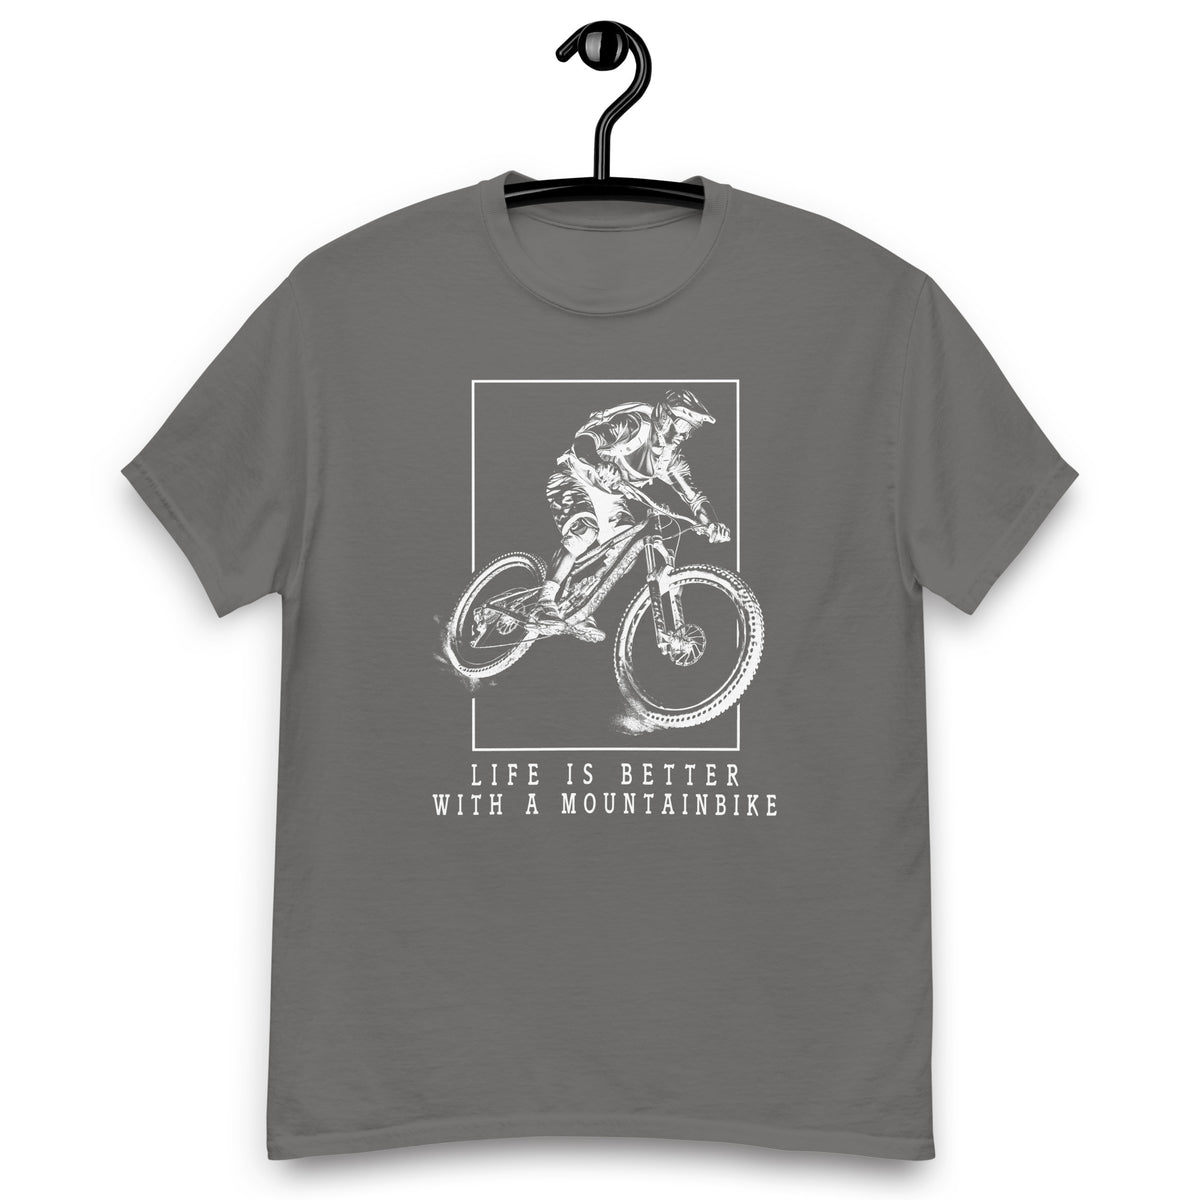 Fahrrad Shirts " Life is better with a Moutainbike "